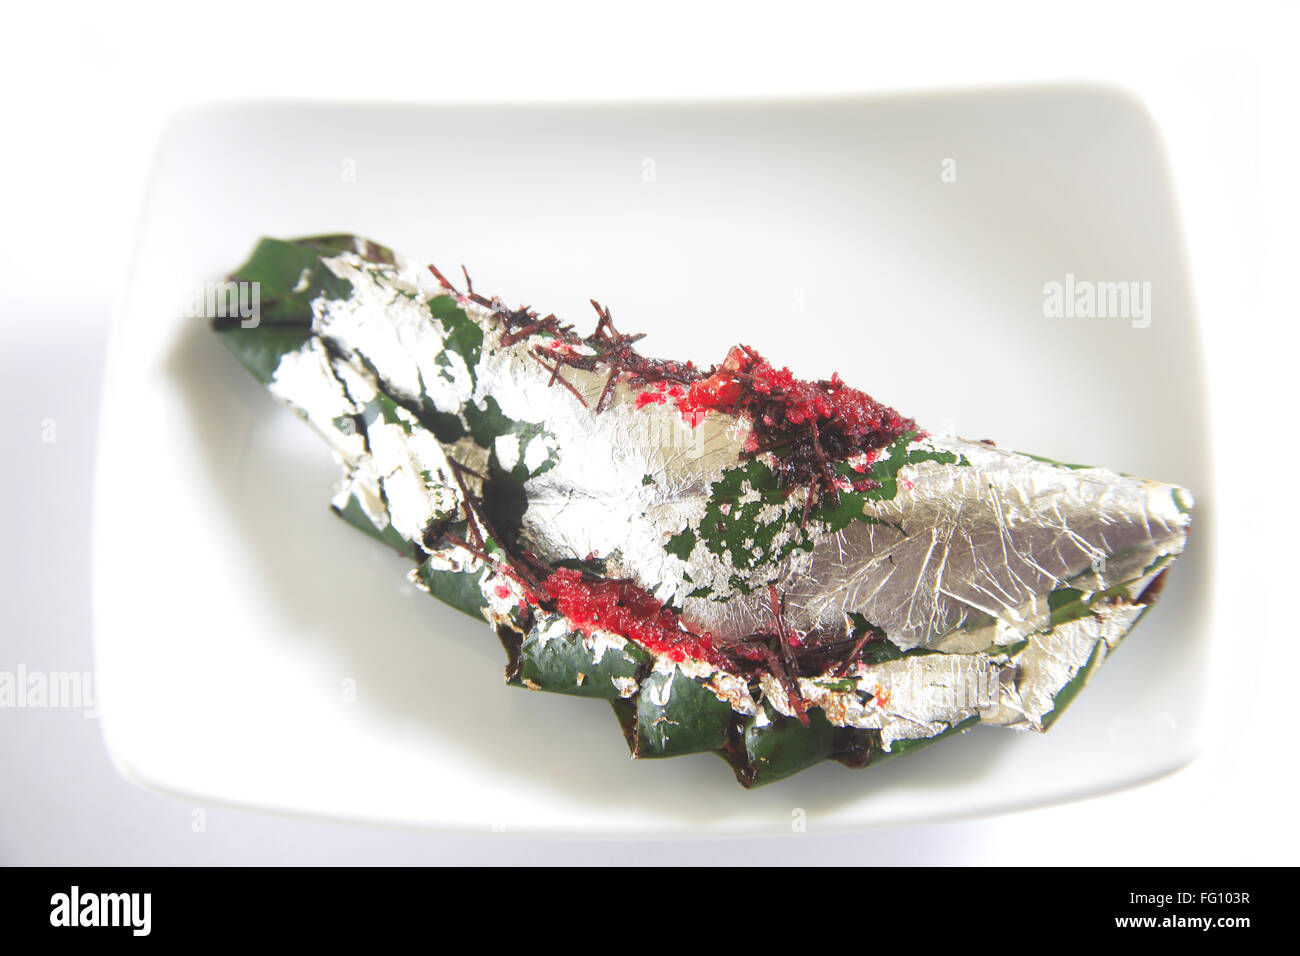 Gilouri pan prepared and folded in betel leaves serve in plate on white background Stock Photo